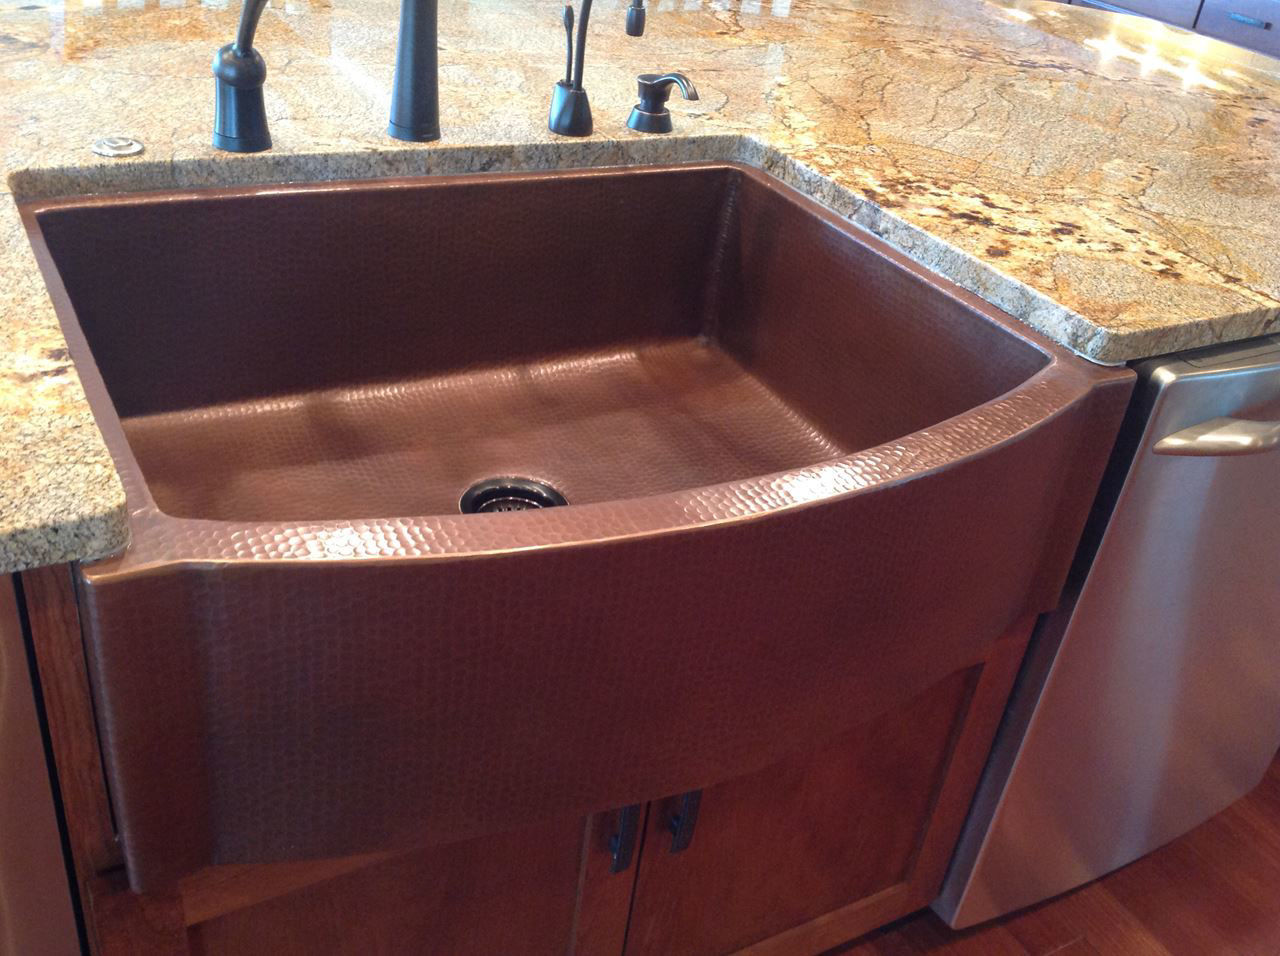 Rounded Front Flat Ends Copper Farmhouse Sink by SoLuna